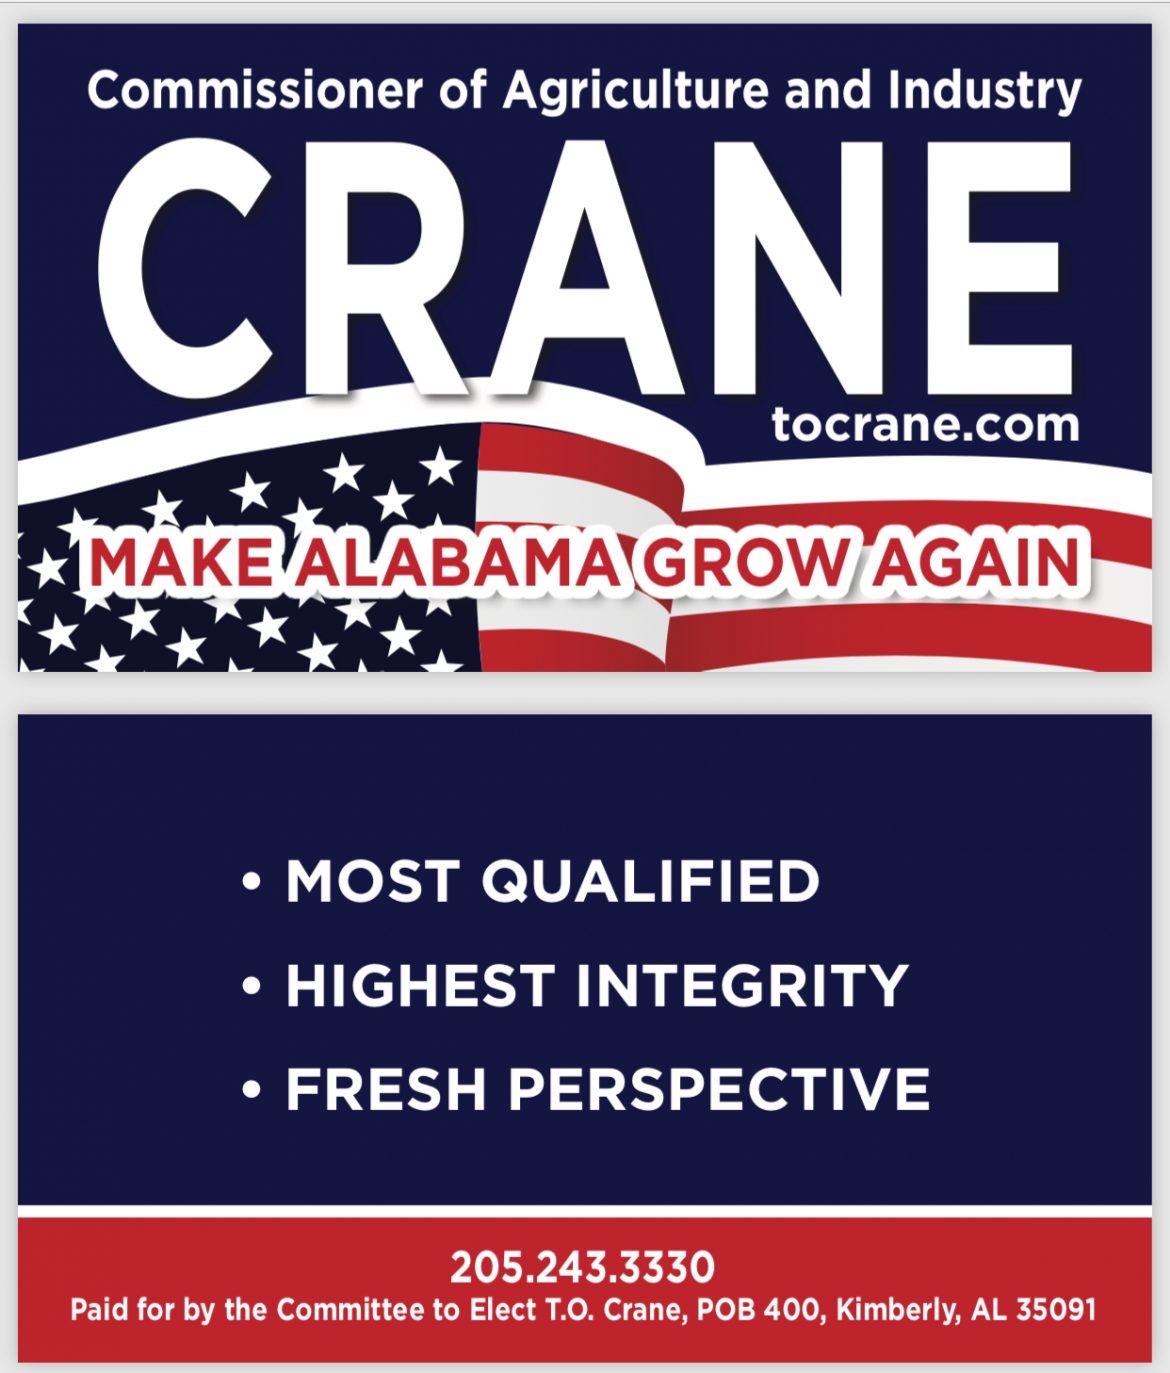 T.O. Crane for Commissioner of Agriculture and Business